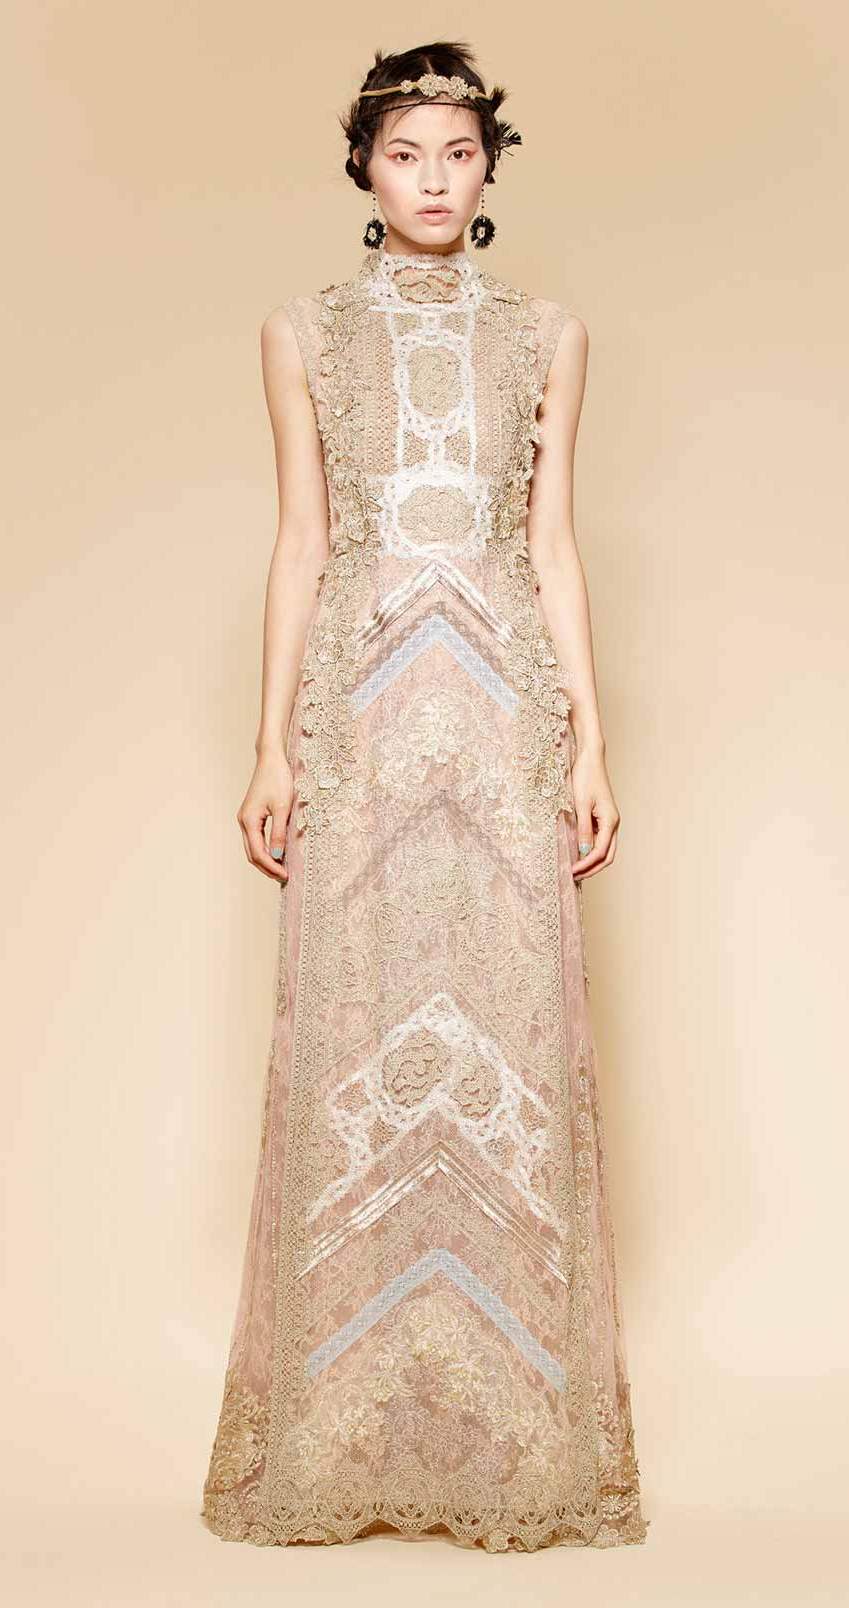 Long evening couture dress made of golden, beige and nude laces